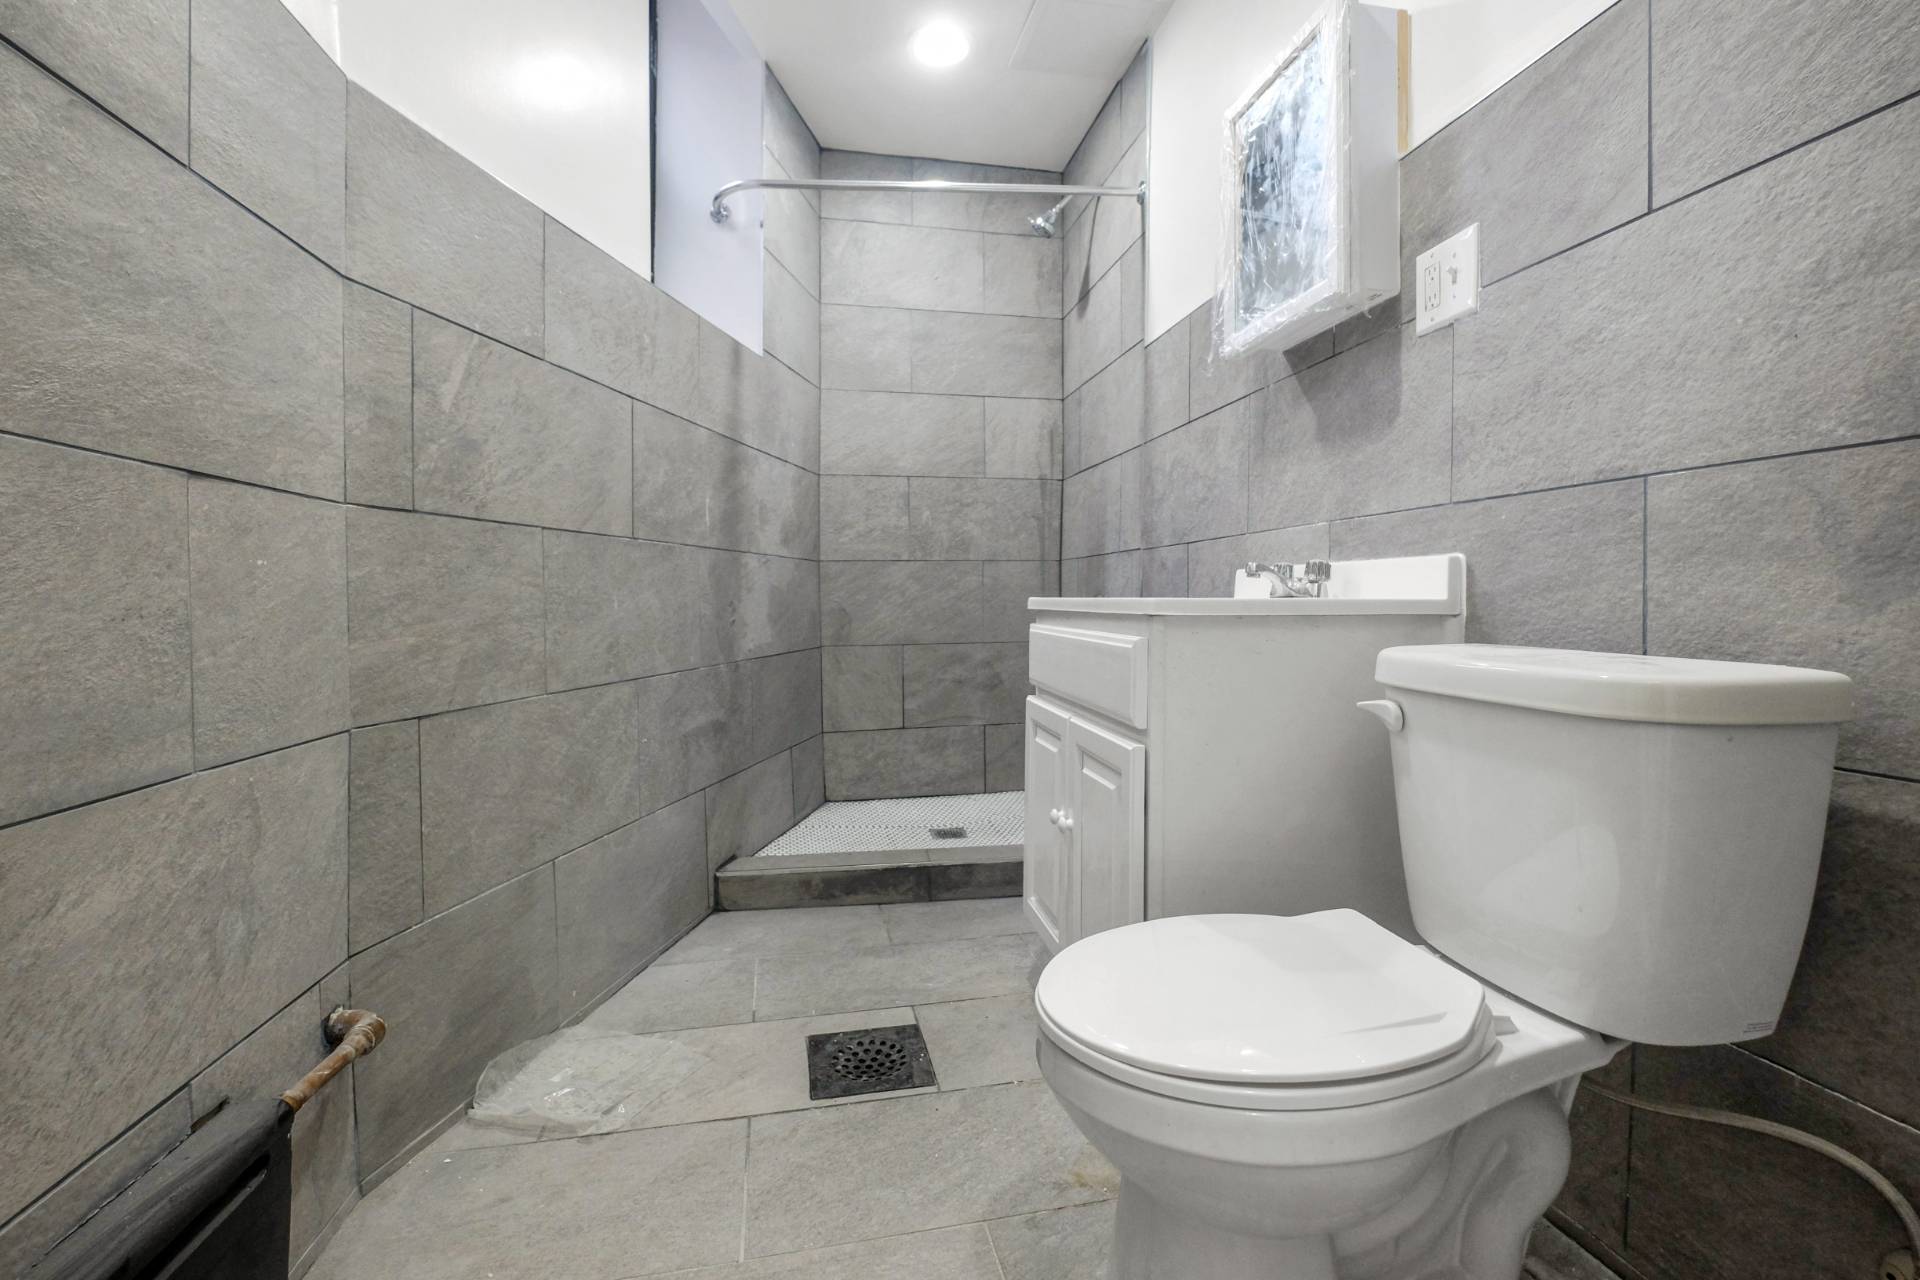 266 East 21st Street, Brooklyn, 36061, New York, United States, 2 Bedrooms Bedrooms, 2 Rooms Rooms,1 BathroomBathrooms,Residential Lease,For Rent,East 21st Street,11122582